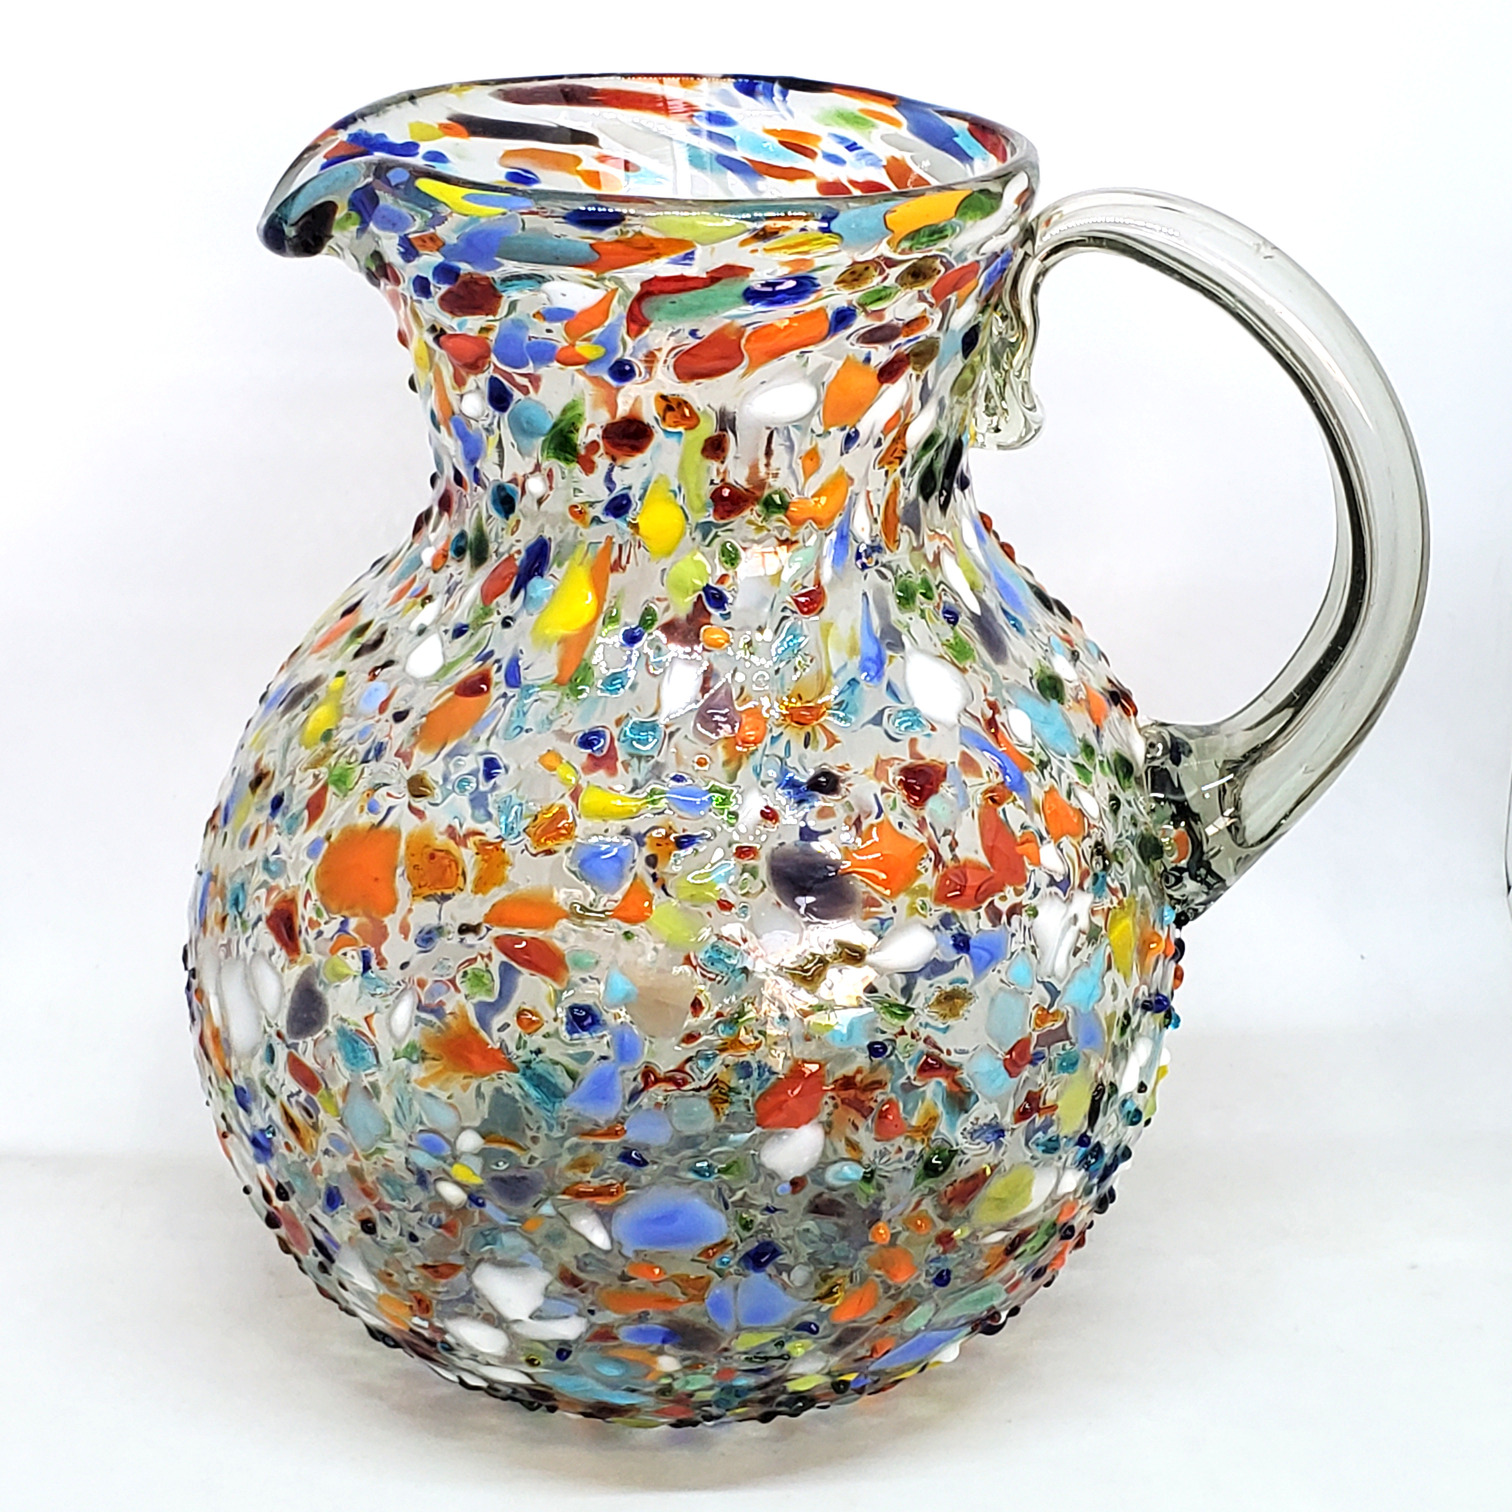 MEXICAN GLASSWARE / Confetti Rocks 120 oz Large Bola Pitcher / Confetti rocks appear to rest inside this modern blown glass pitcher that will make your table setting shine. Each pitcher is adorned with hundreds of tiny multicolor glass particles, giving it a one-of-a-kind look and feel.